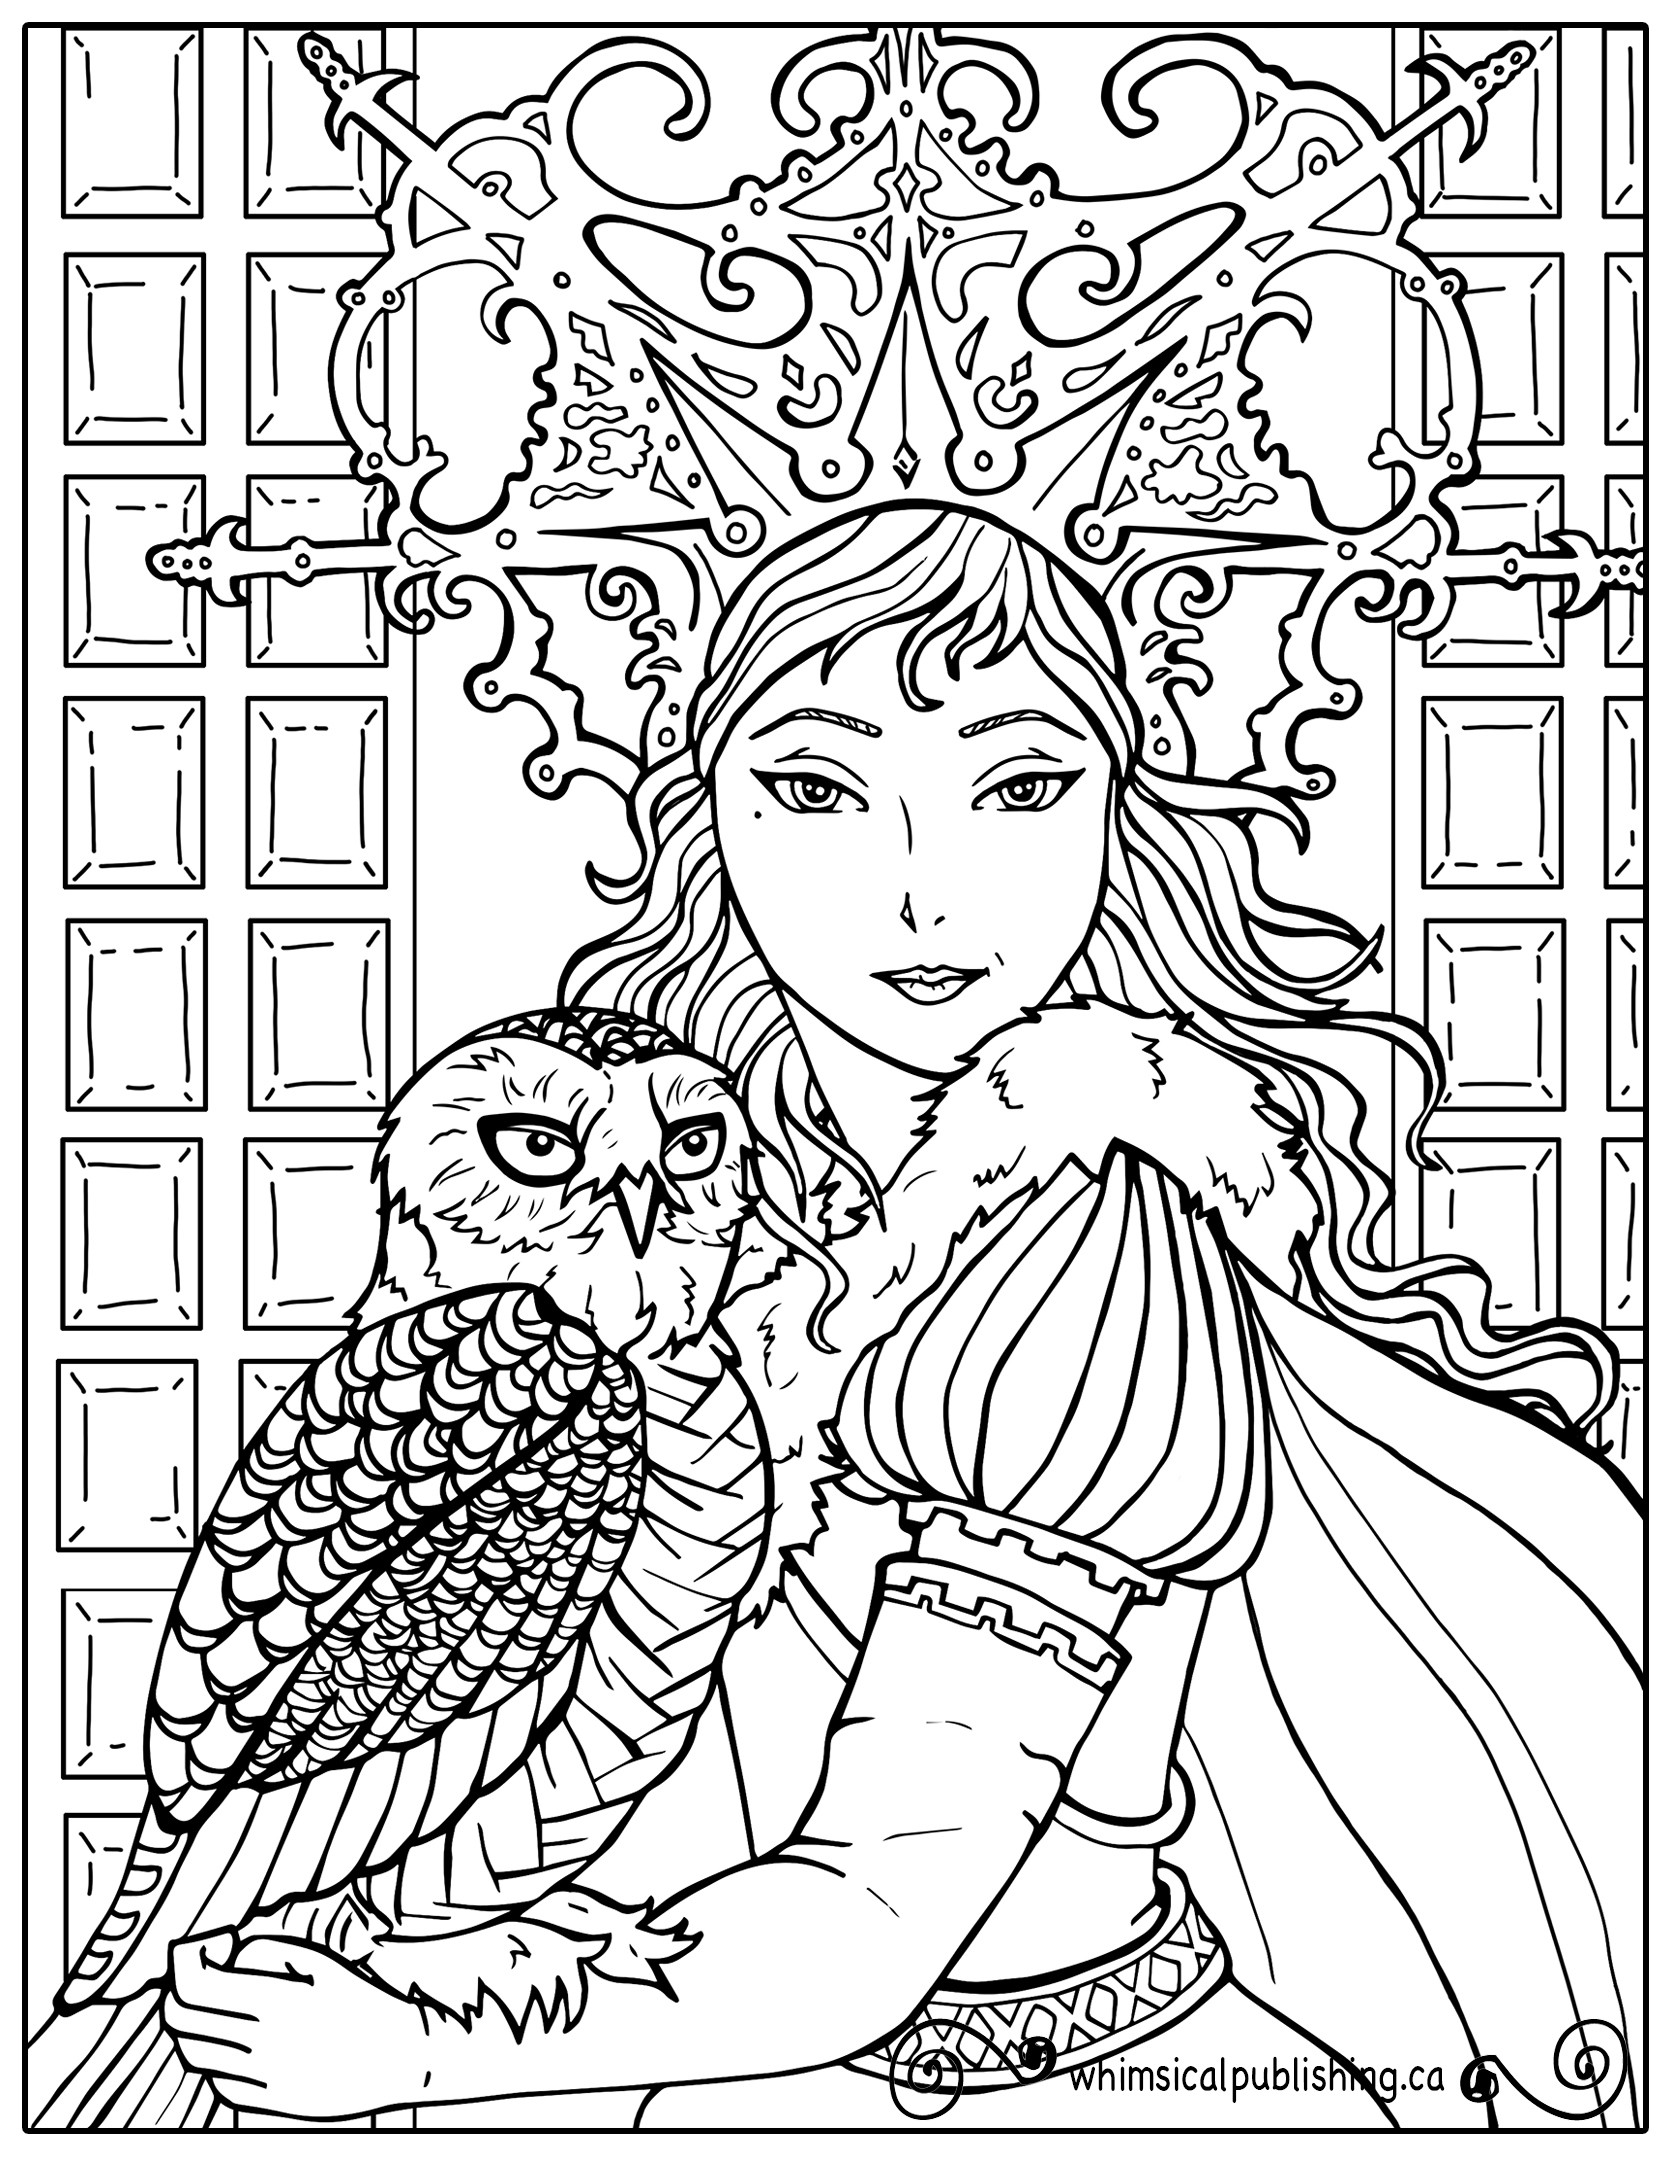 Unique Adult Coloring Books
 Free Colouring Pages